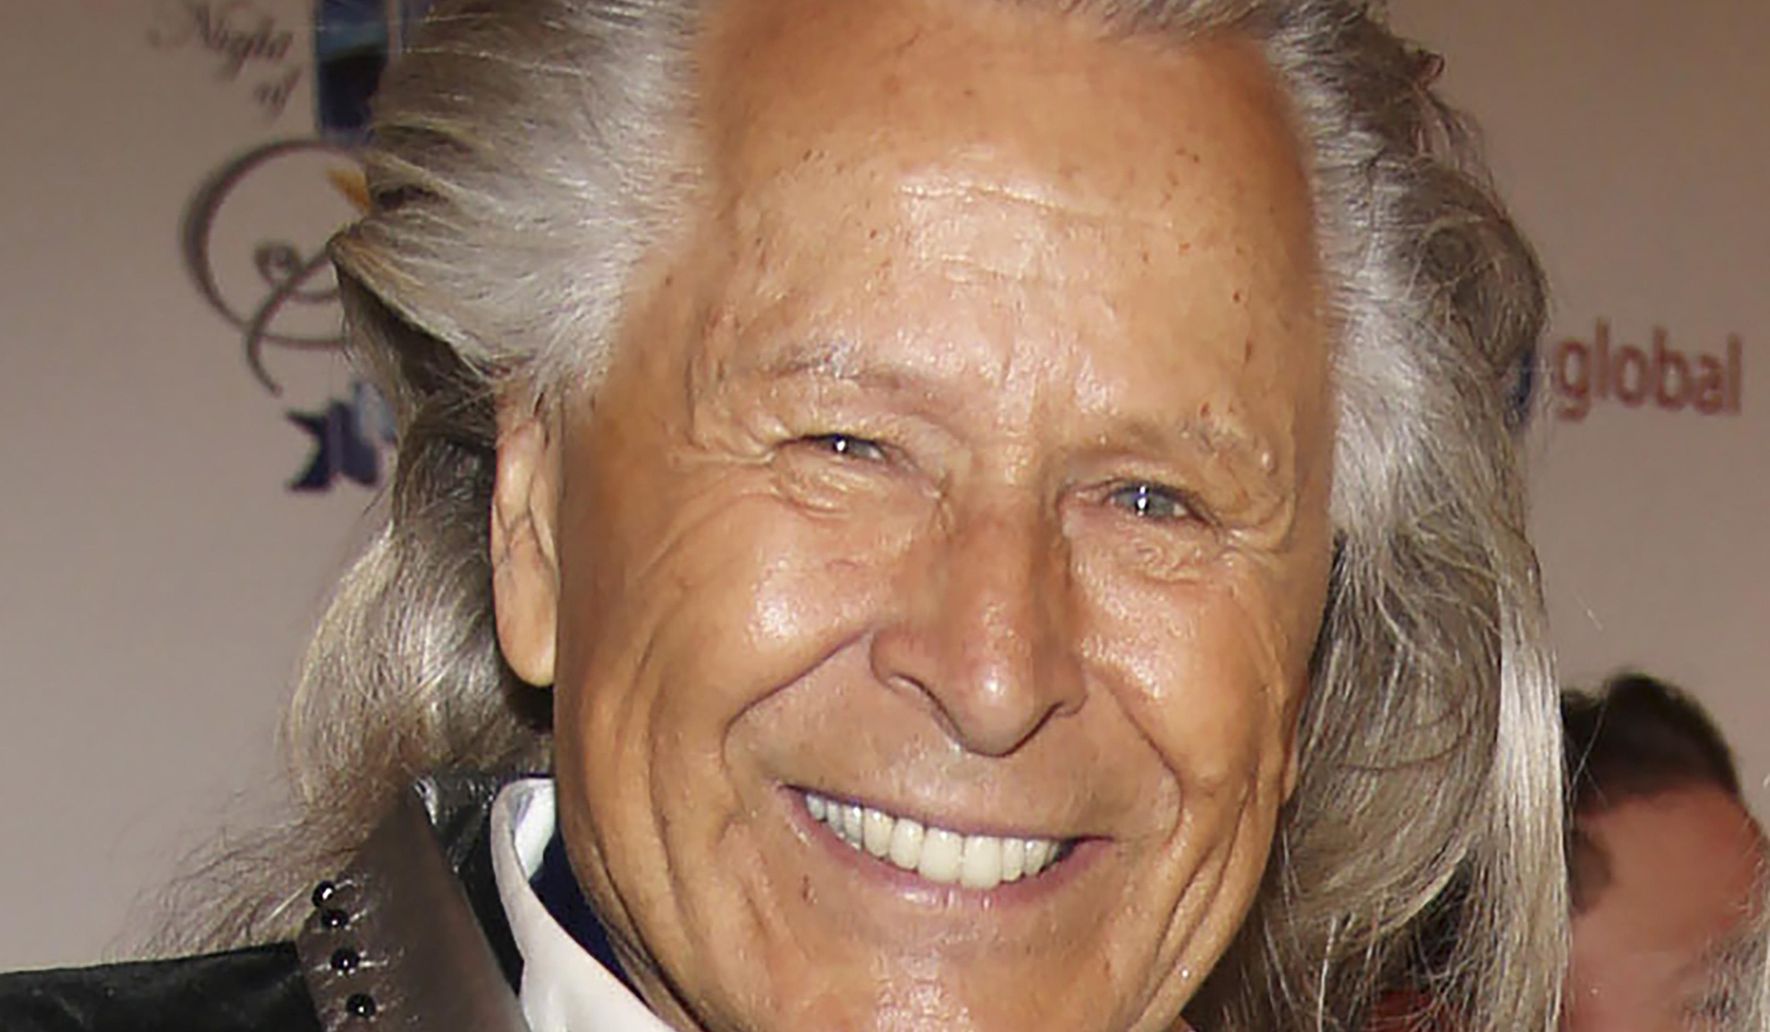 Fashion mogul Peter Nygard arrested in Canada on sex charges